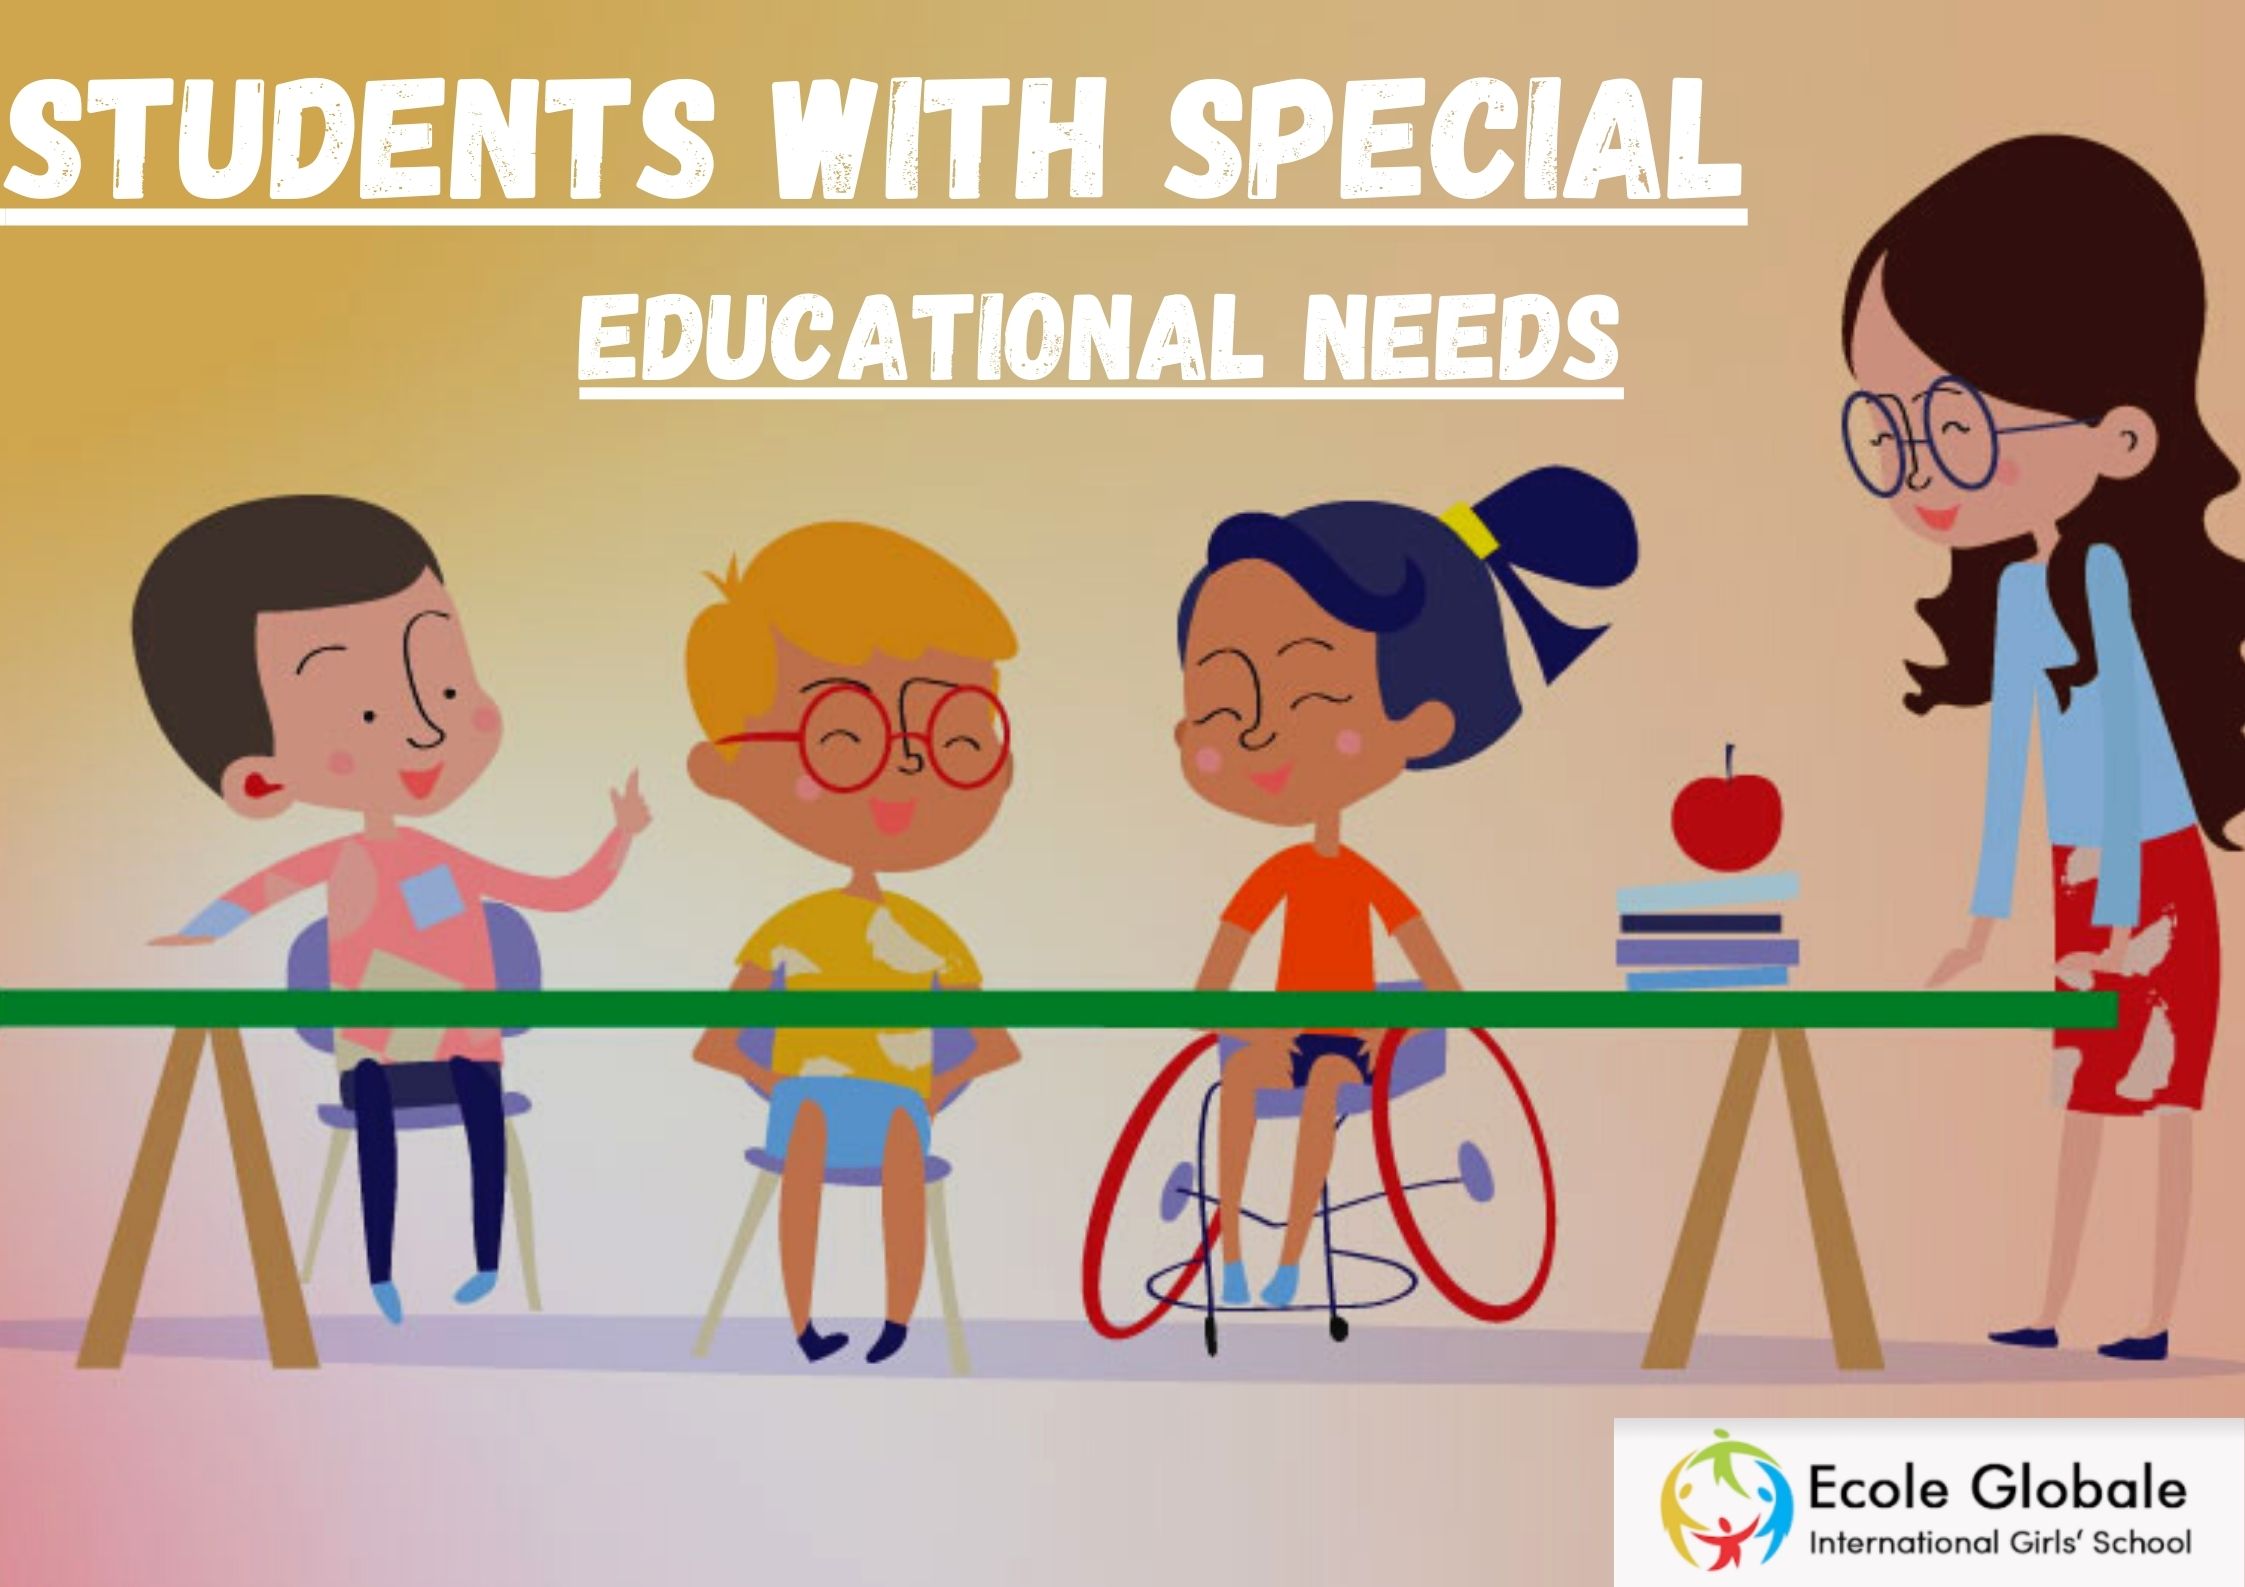 EDUCATION FOR STUDENTS WITH SPECIAL NEEDS